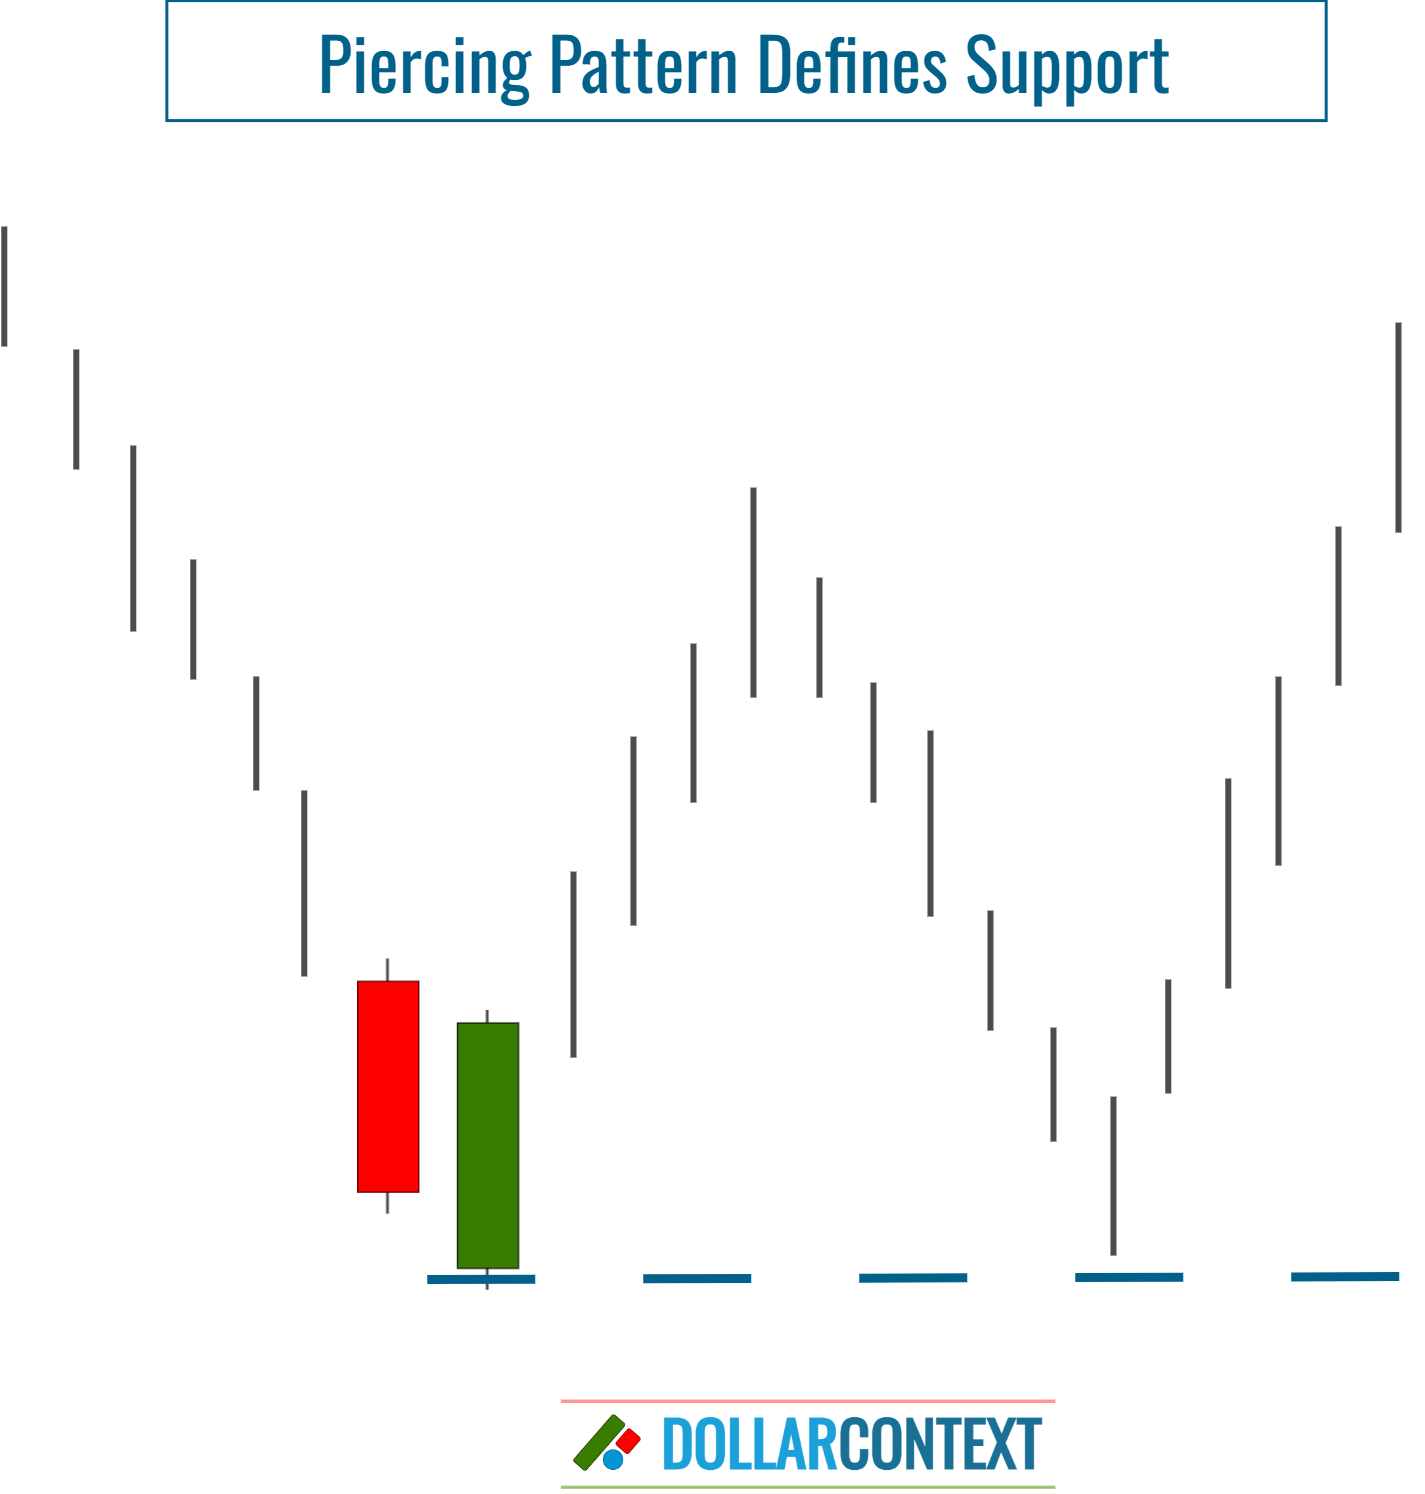 Piercing Pattern Establishes a New Support Zone